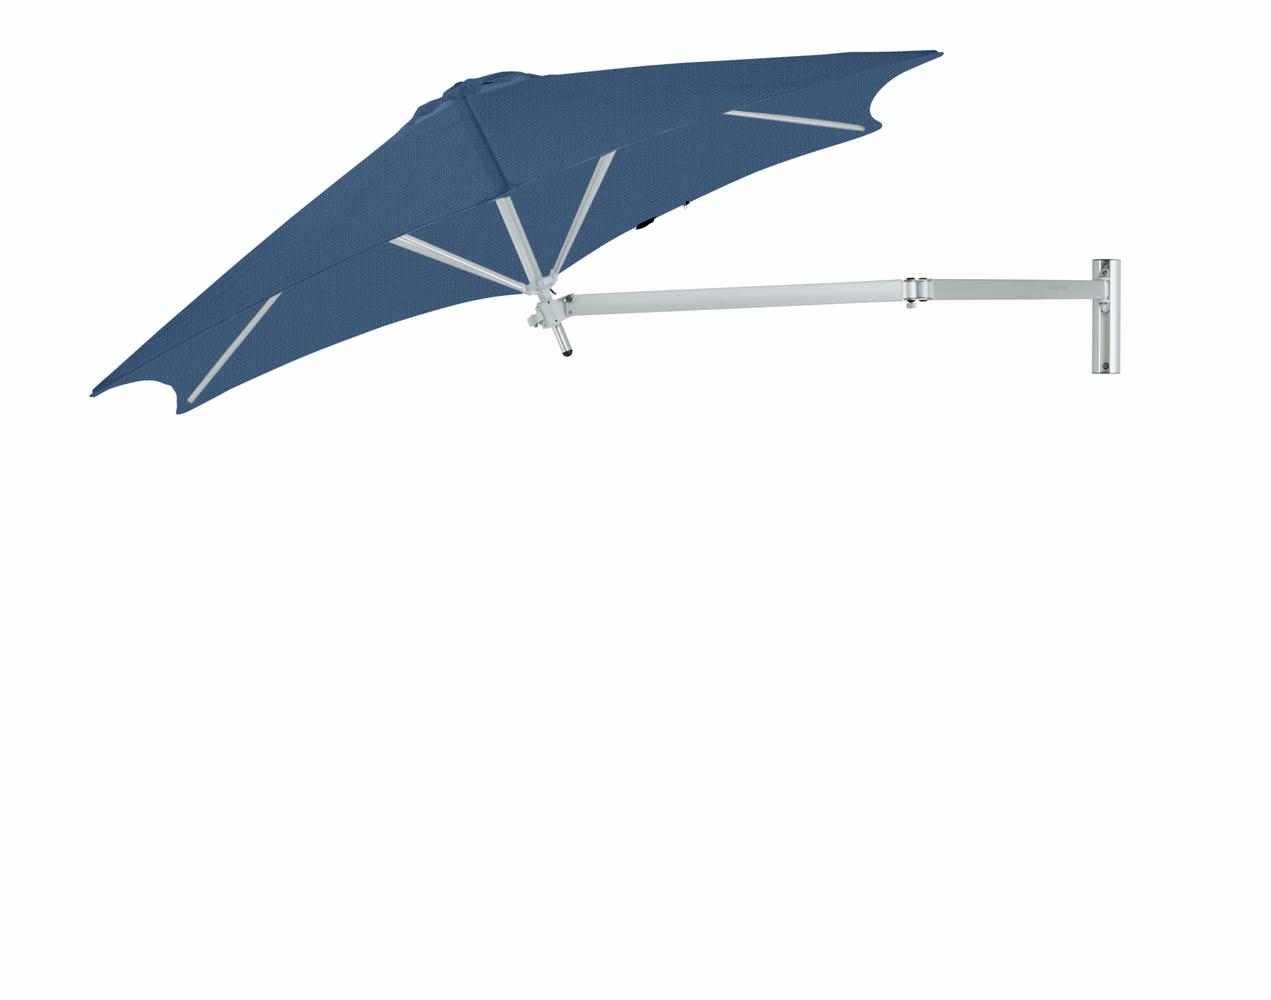 Paraflex wall mounted parasols round 2,7 m with Blue Storm fabric and a Neo arm